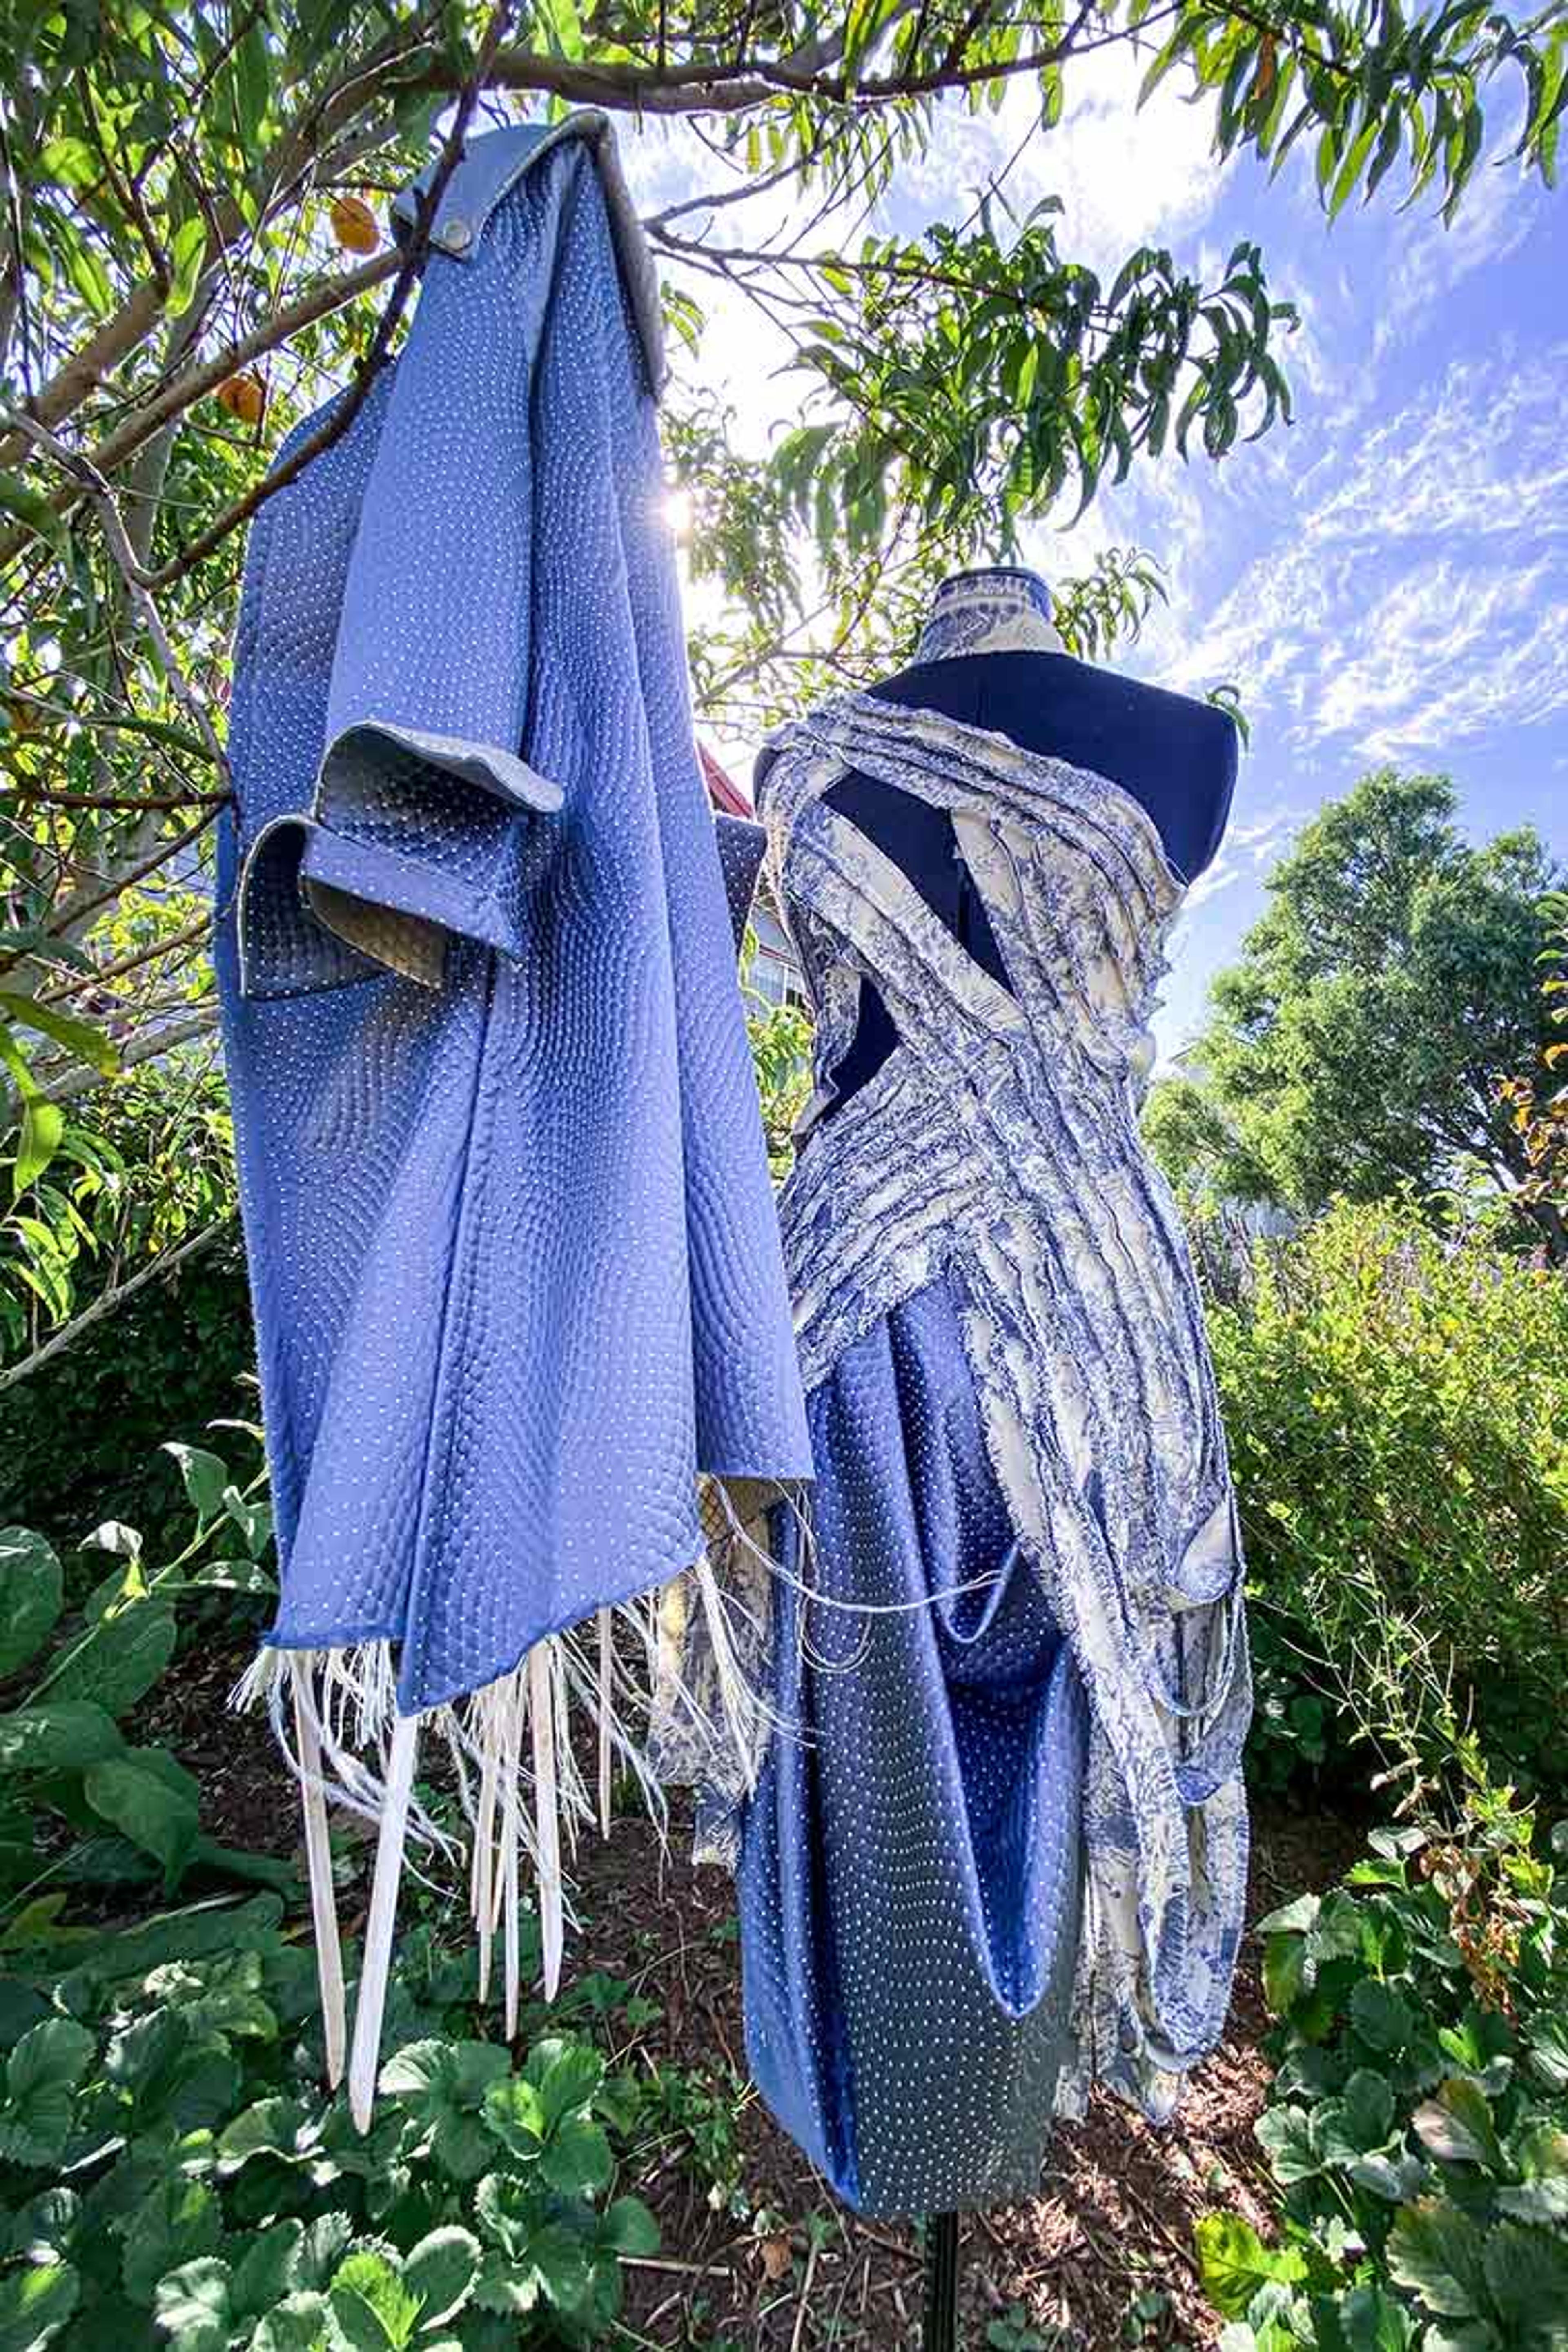 Parker Spear's blue dress design with matching jacket on display in nature